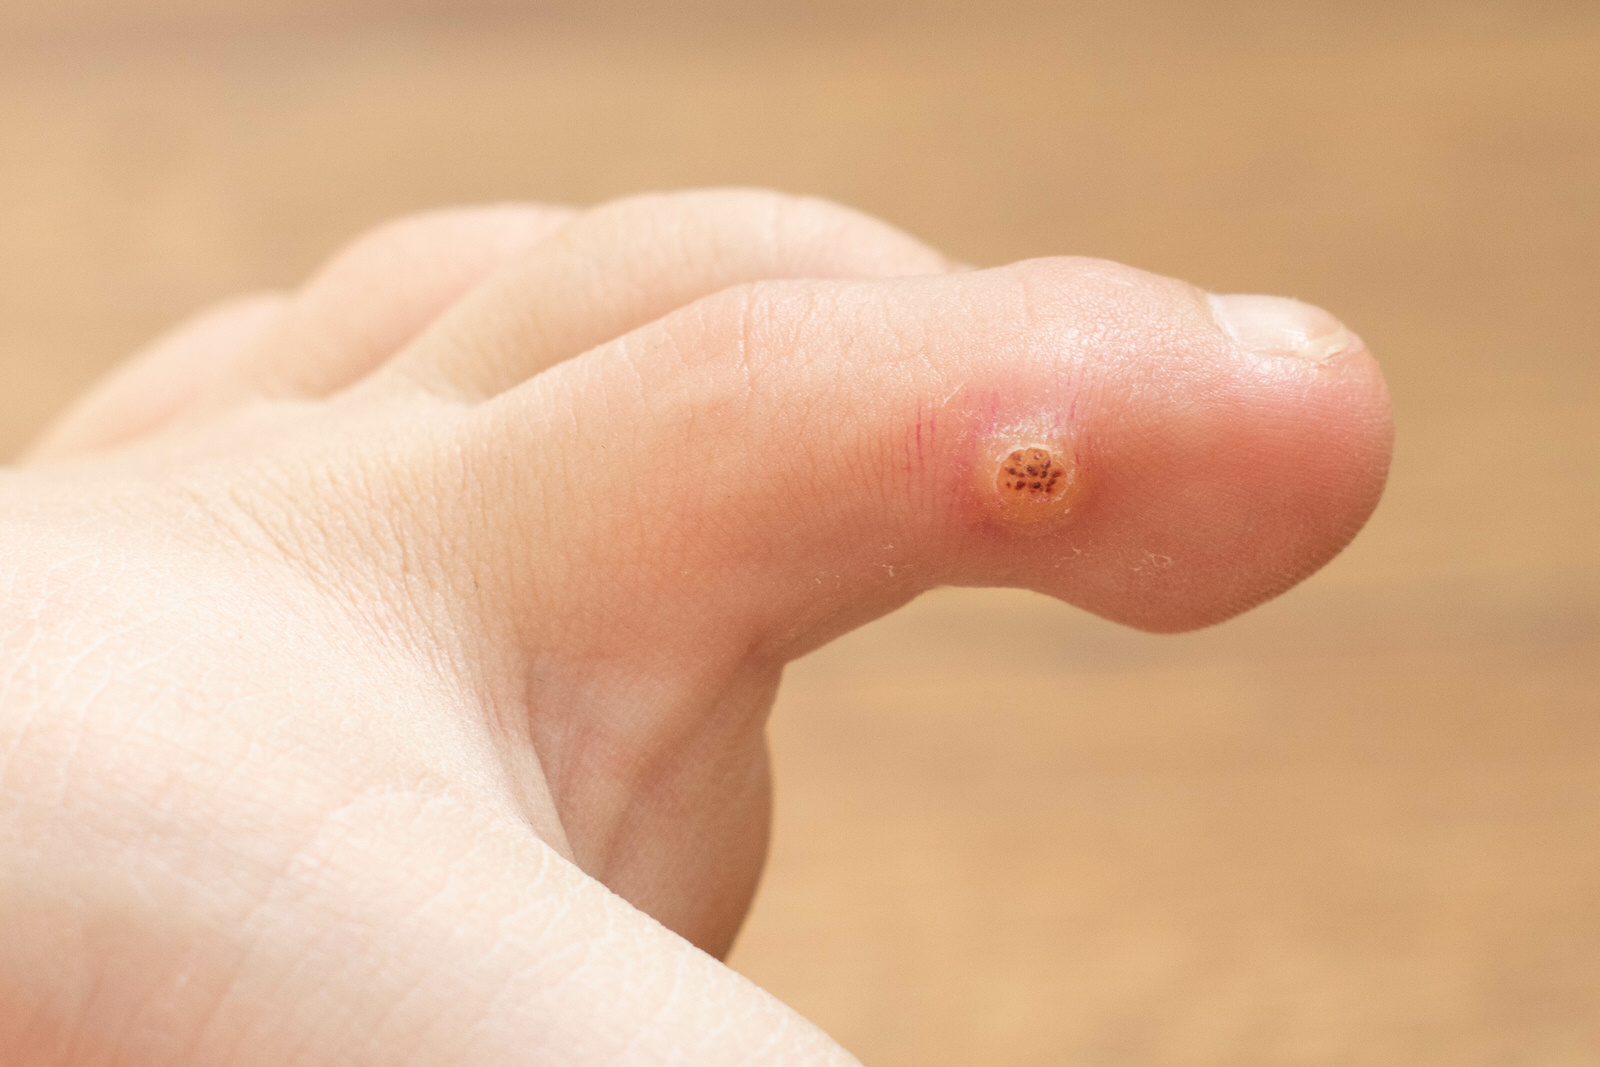 Papilloma wart on foot. How to Prevent & Treat Plantar Warts - Foot Care cancer de piele obraz